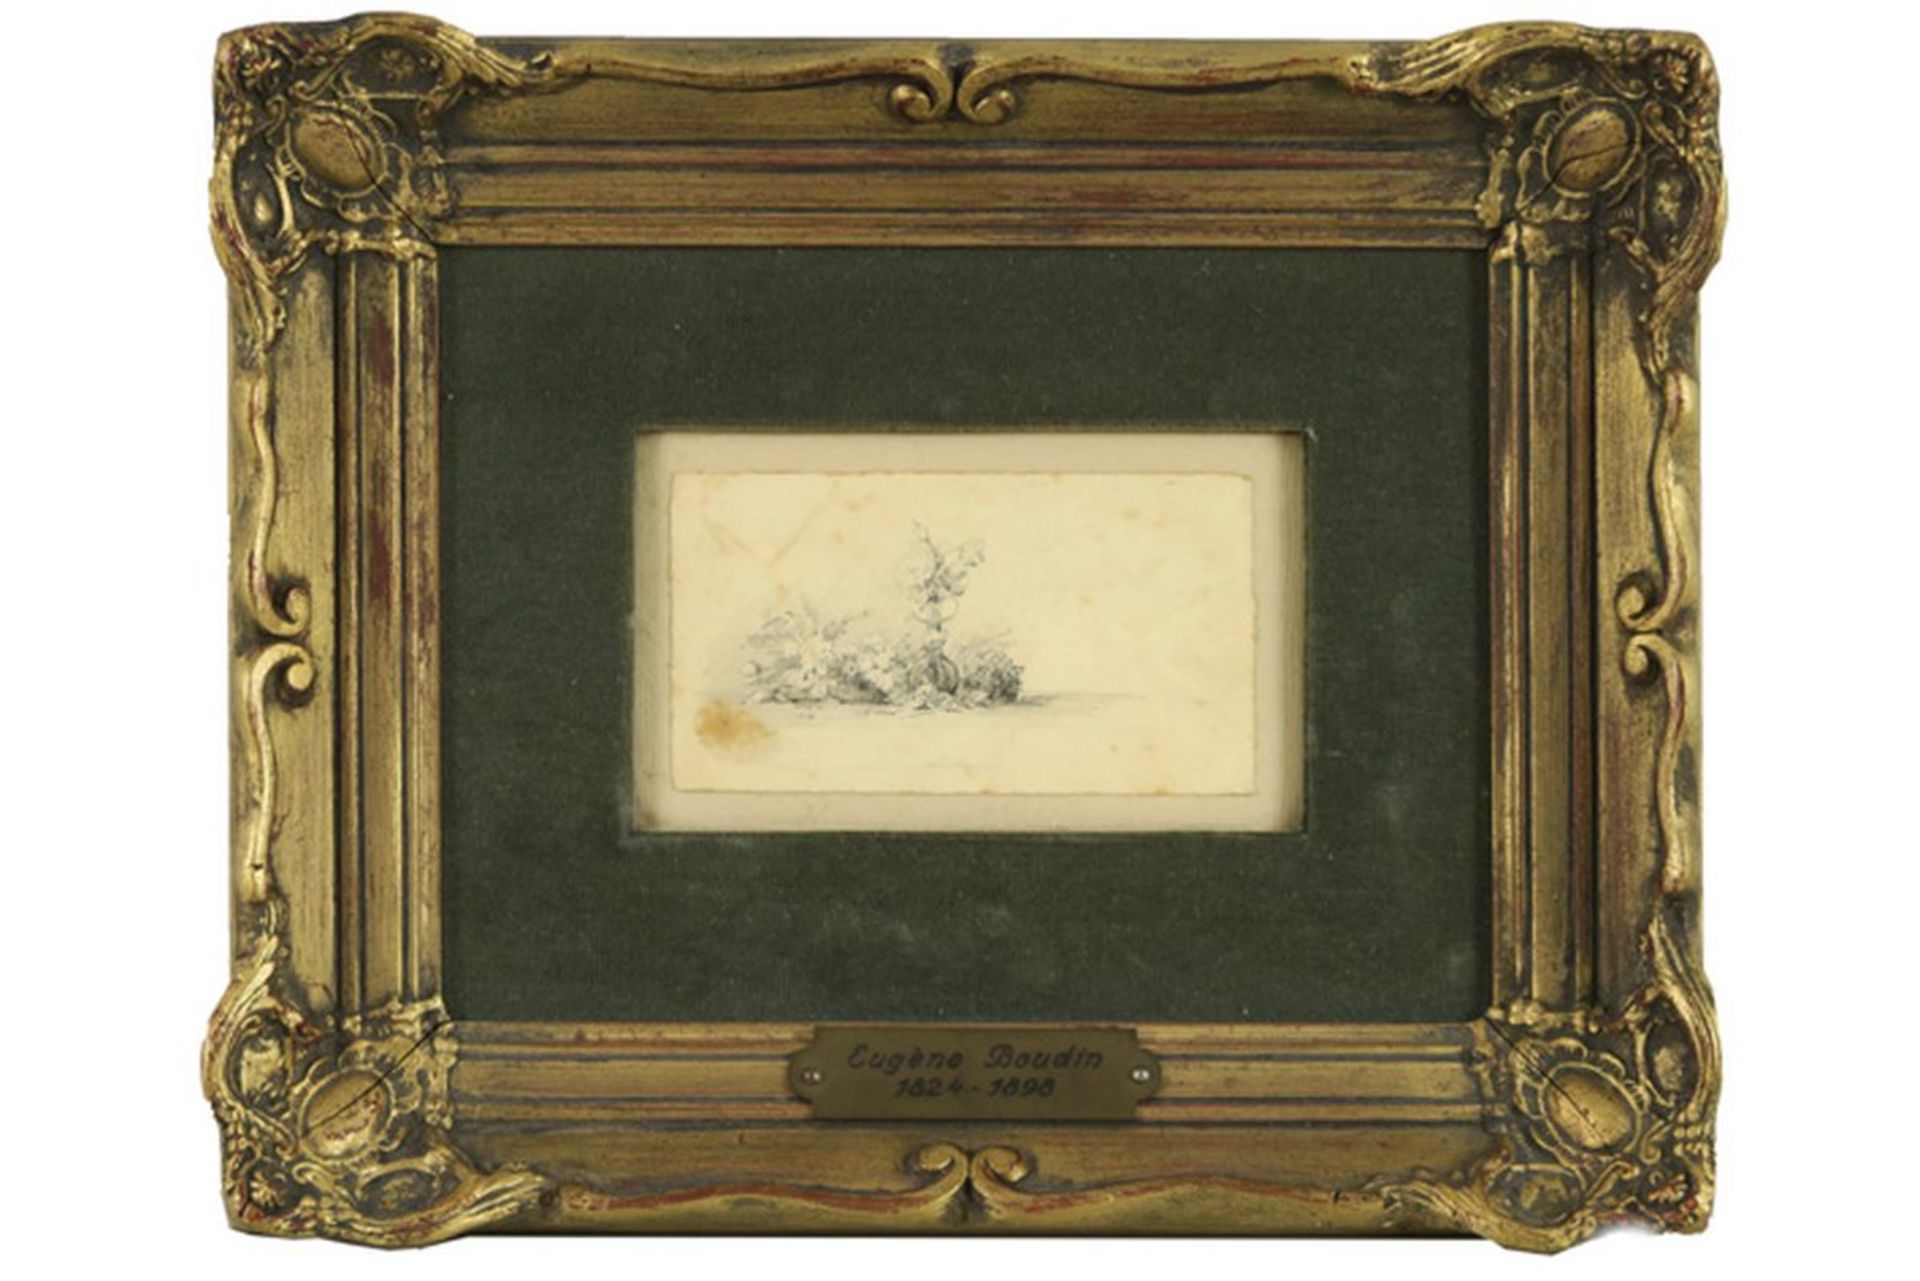 19th Cent. Eugène Boudin drawing - with certificate - - BOUDIN EUGÈNE (1824 - [...]